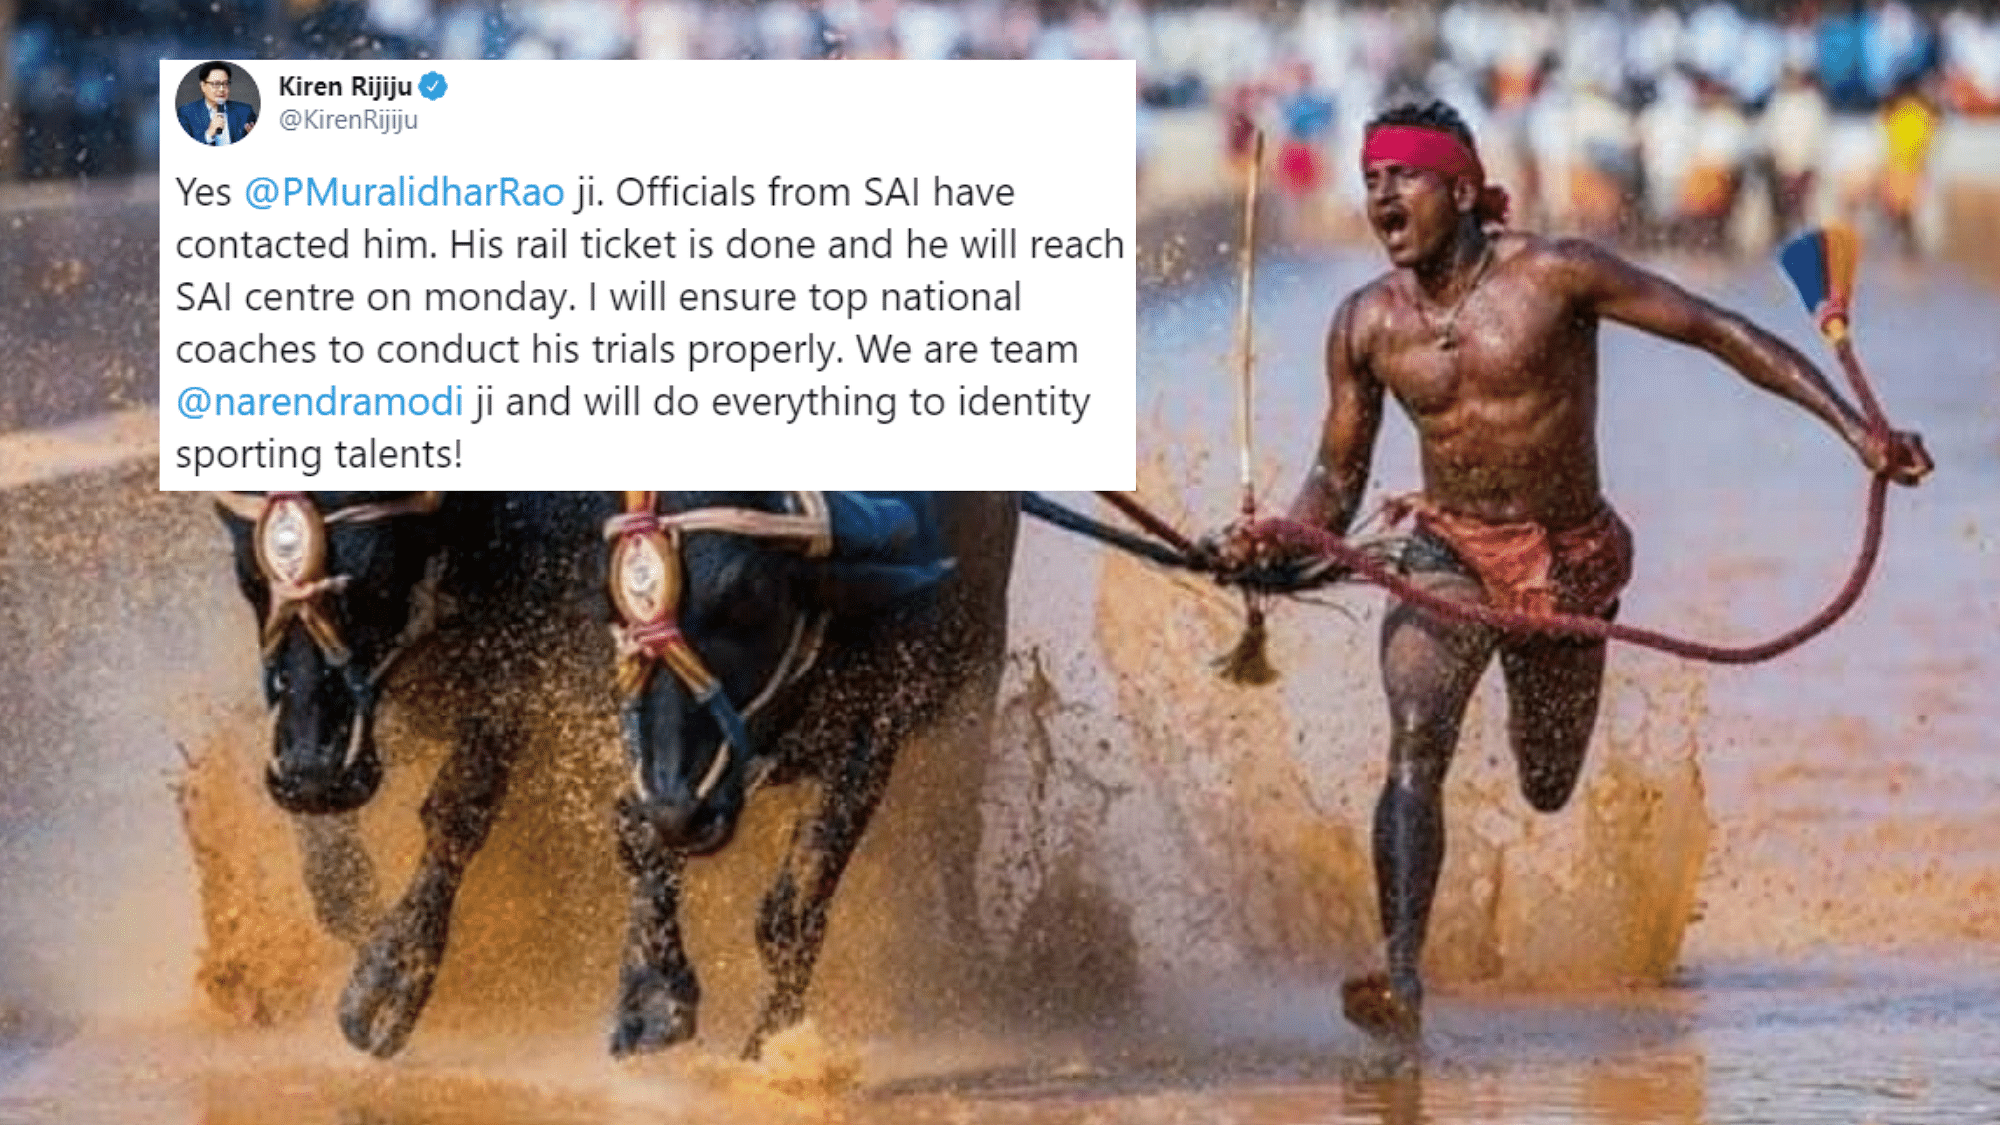 The 28-year-old is a construction worker &amp; took just 13.62 seconds to cover a distance of 145 metres at the Kambala.